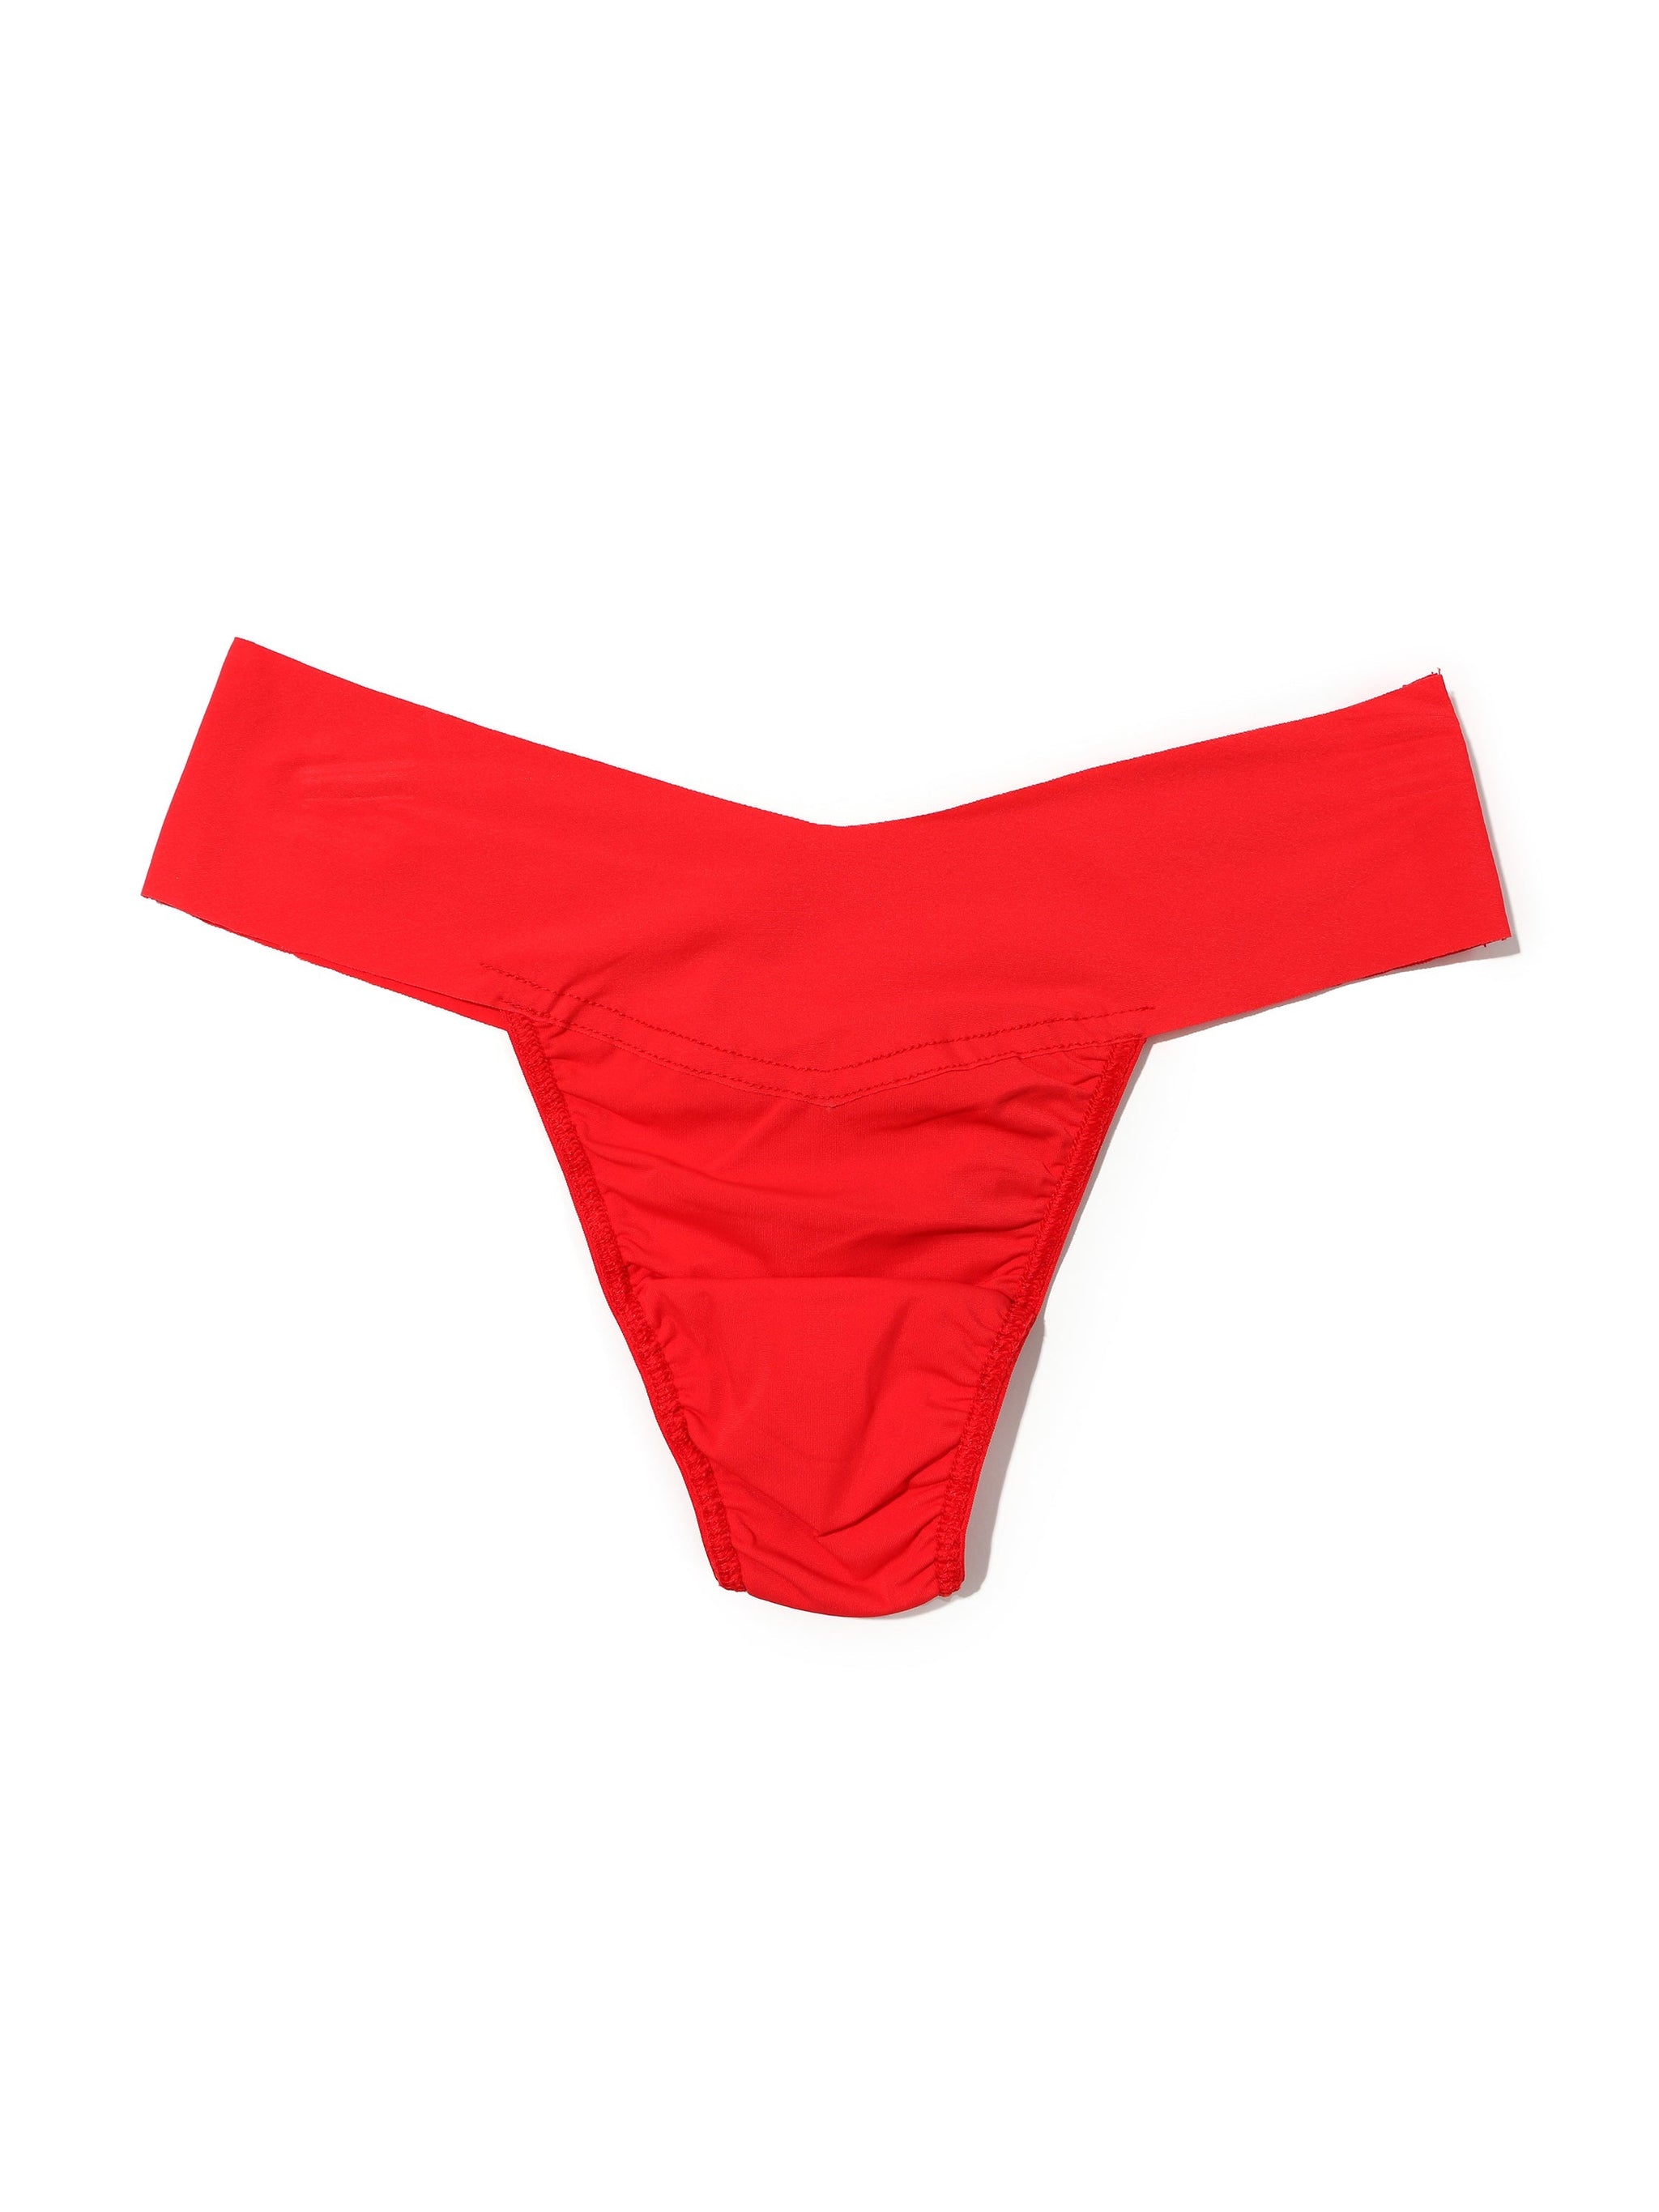 Hanky Panky Berry in Love Low Rise Thong at Von Maur